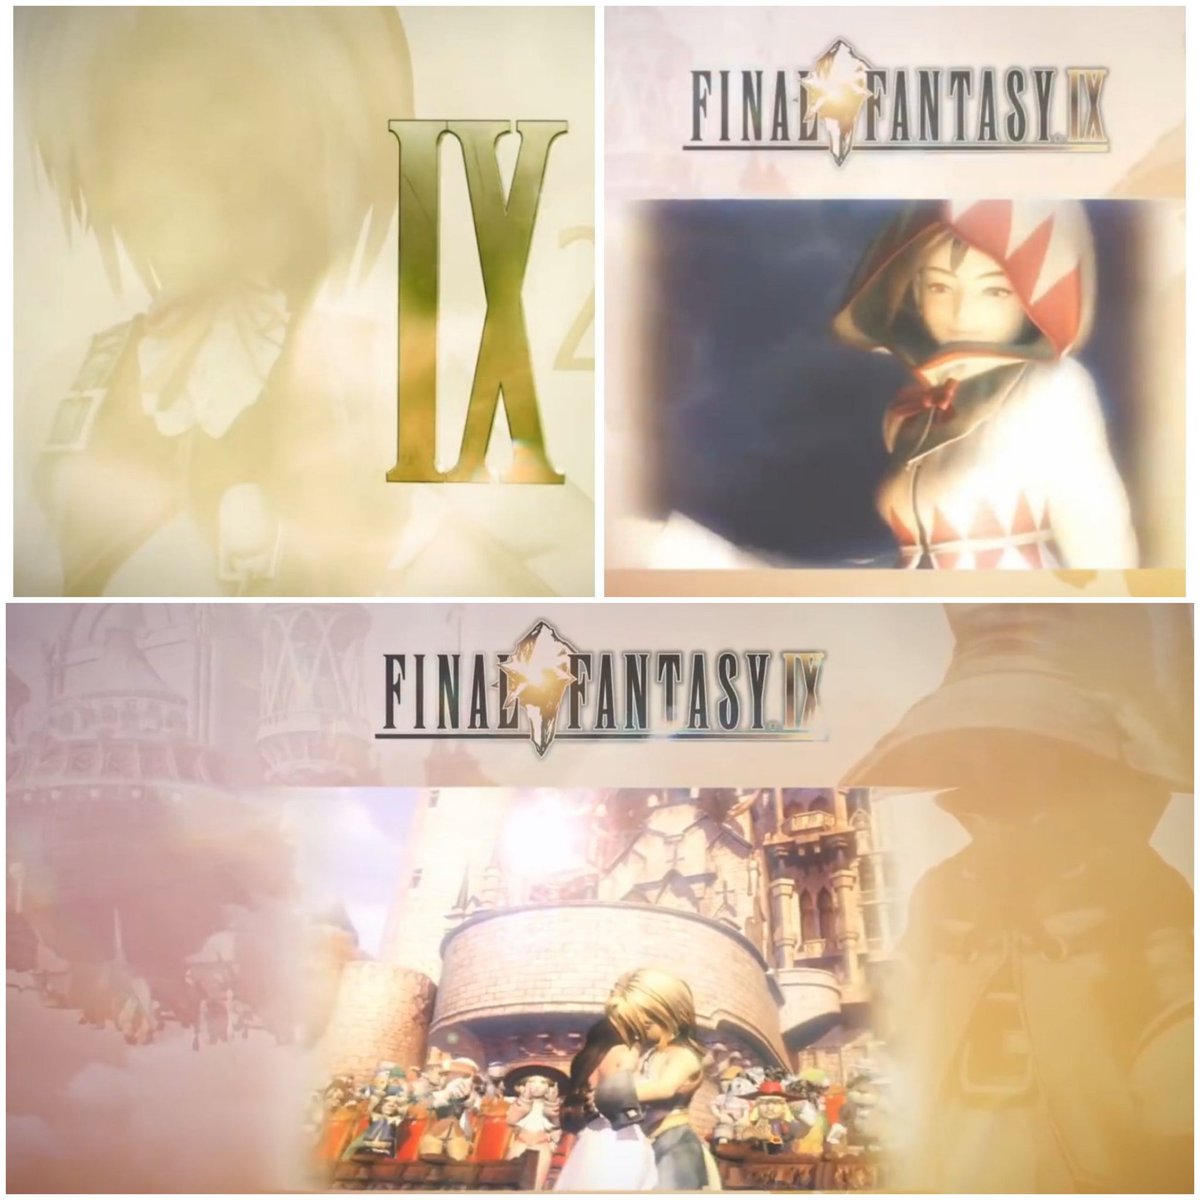 People really be surprised that FF7R's plot revolves heavily around Aerith.... even tho SQEX held "Final Fantasy 30th Anniversary Museum Exhibition : Memories of You" back in 2018 These 4 pairings were the representatives of their respective titles  #FF7R    #Clerith